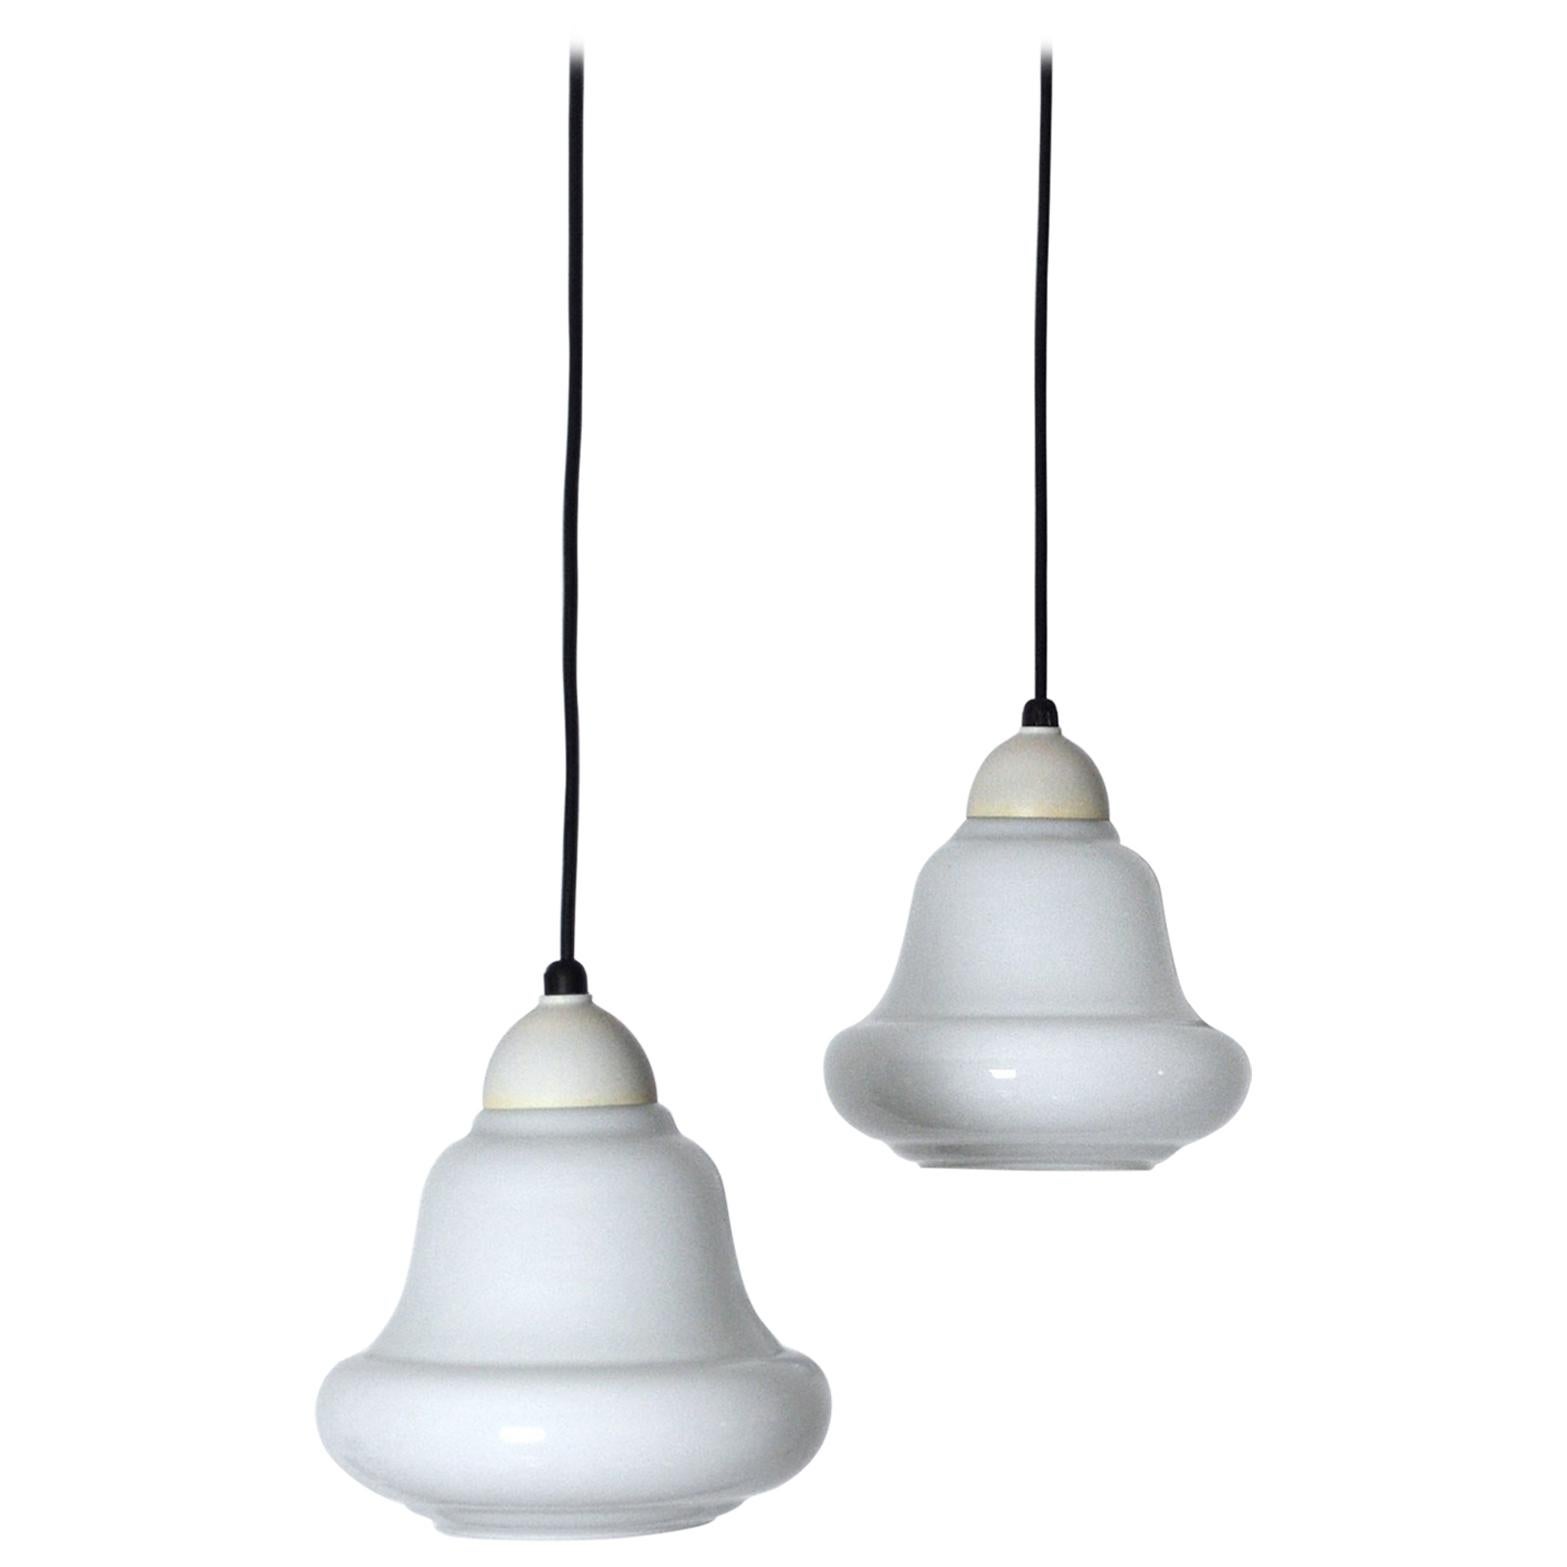 Opaline Glass Ceiling Lamps, Denmark, 1940-50s For Sale